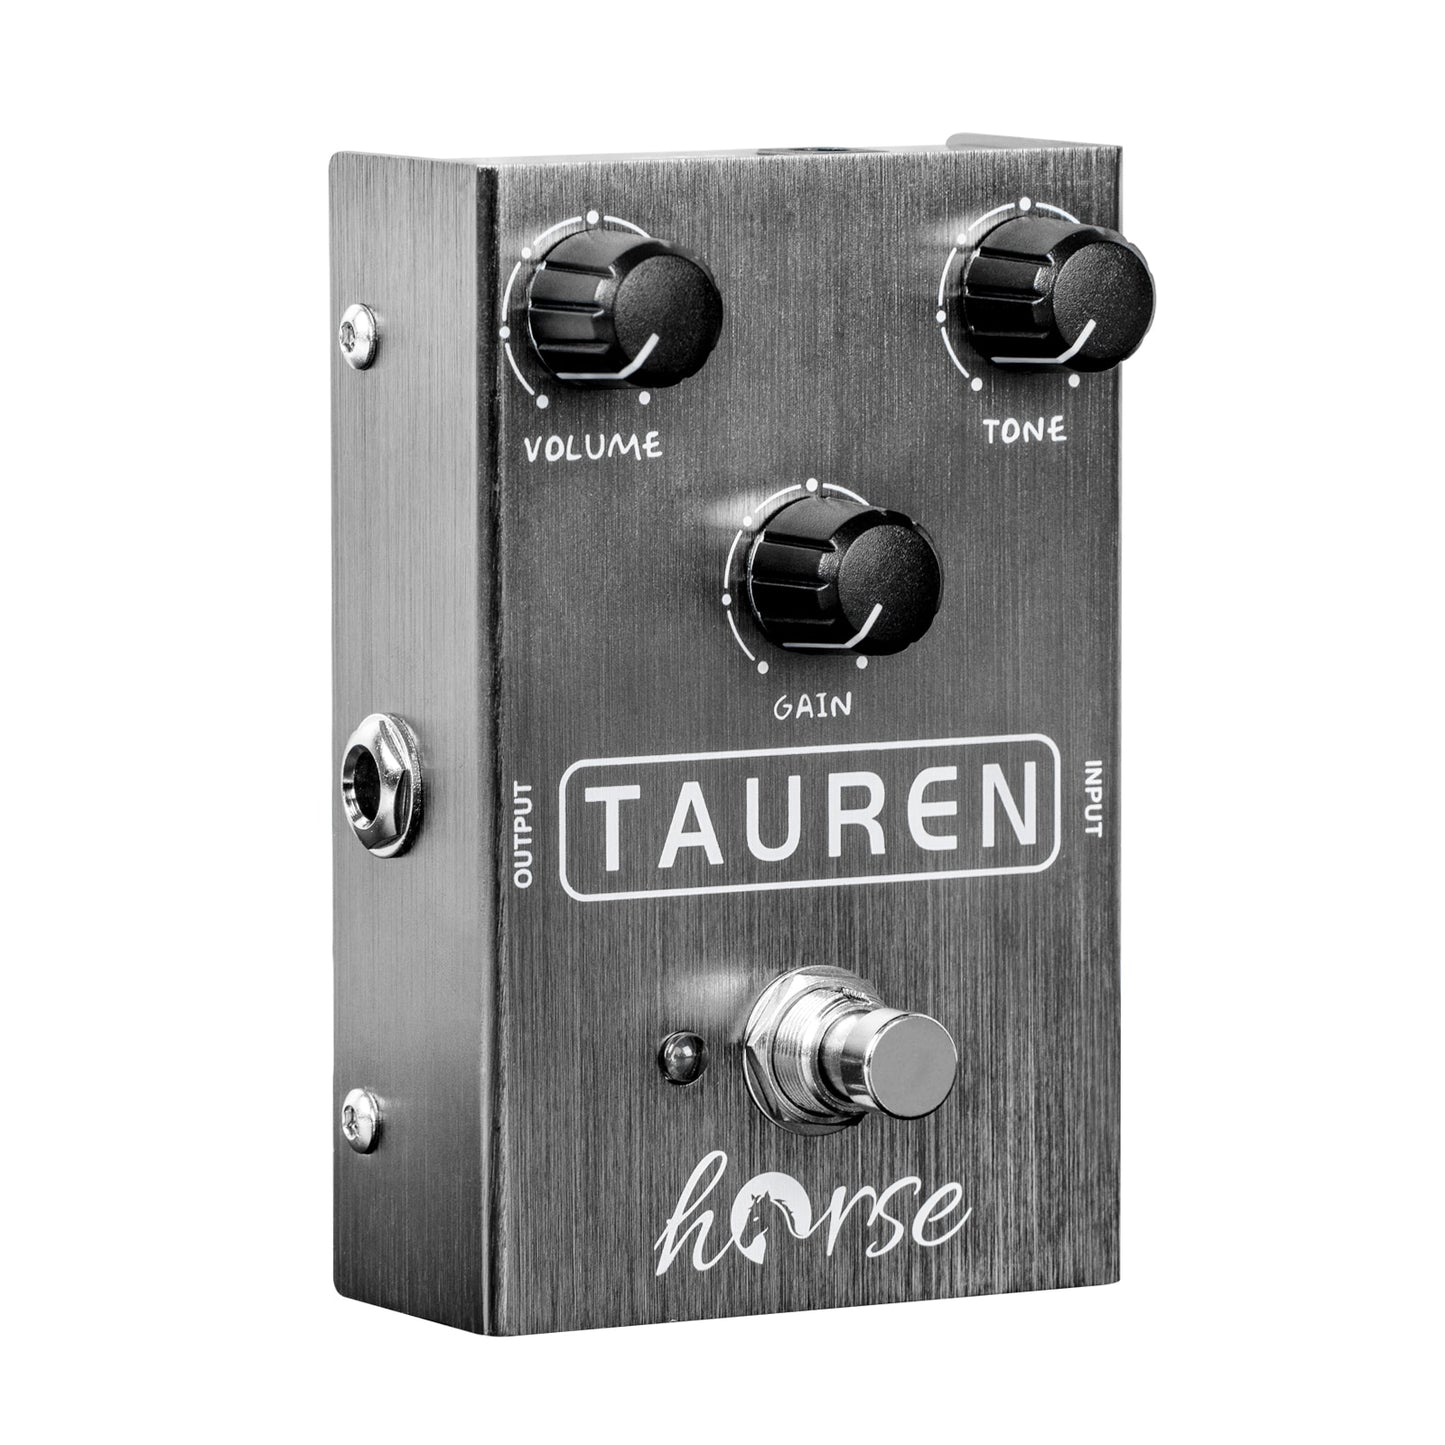 Horse Tauren Wide Range High Gain Overdrive Pedal from Clean Boost to Distortion for Electric Guitar Effect